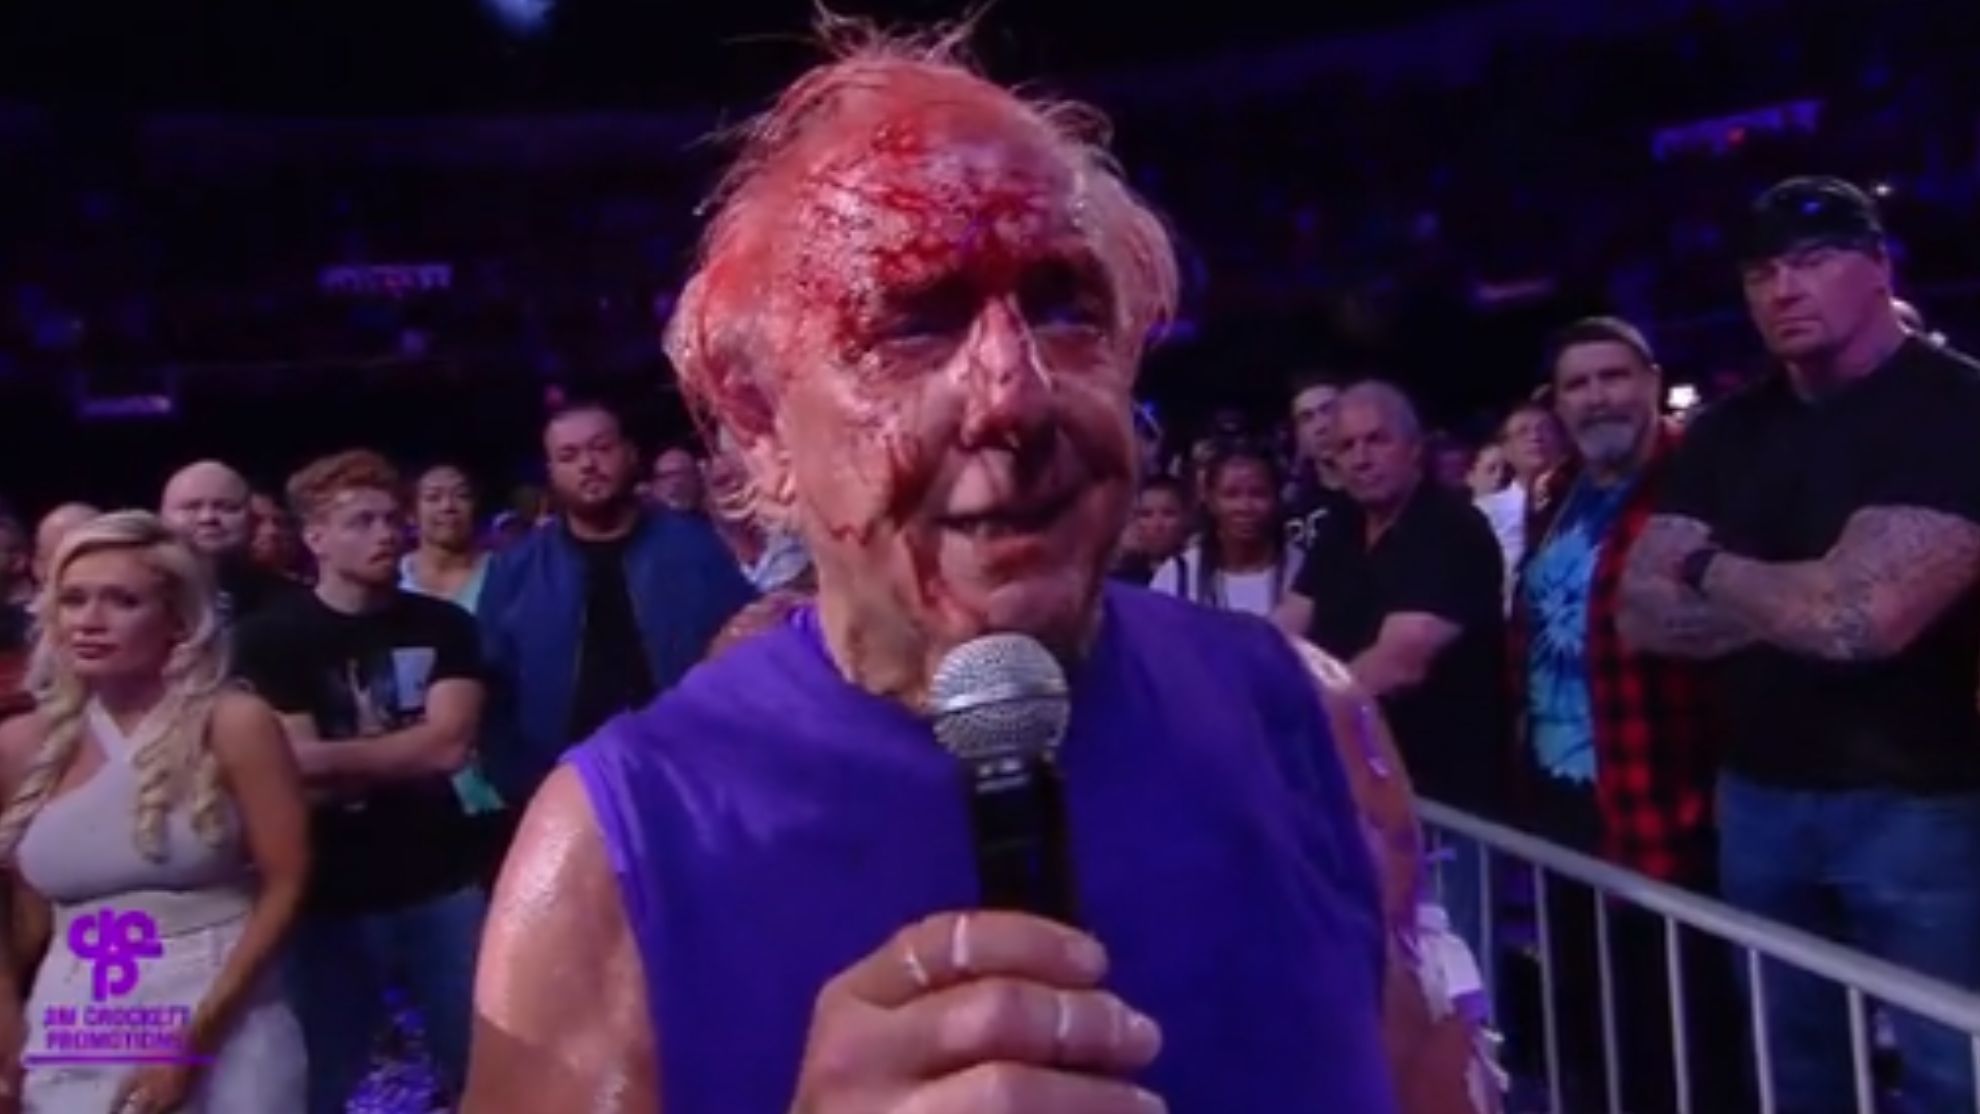 Ric Flair Discloses Suffering a Heart Attack in His Final Match